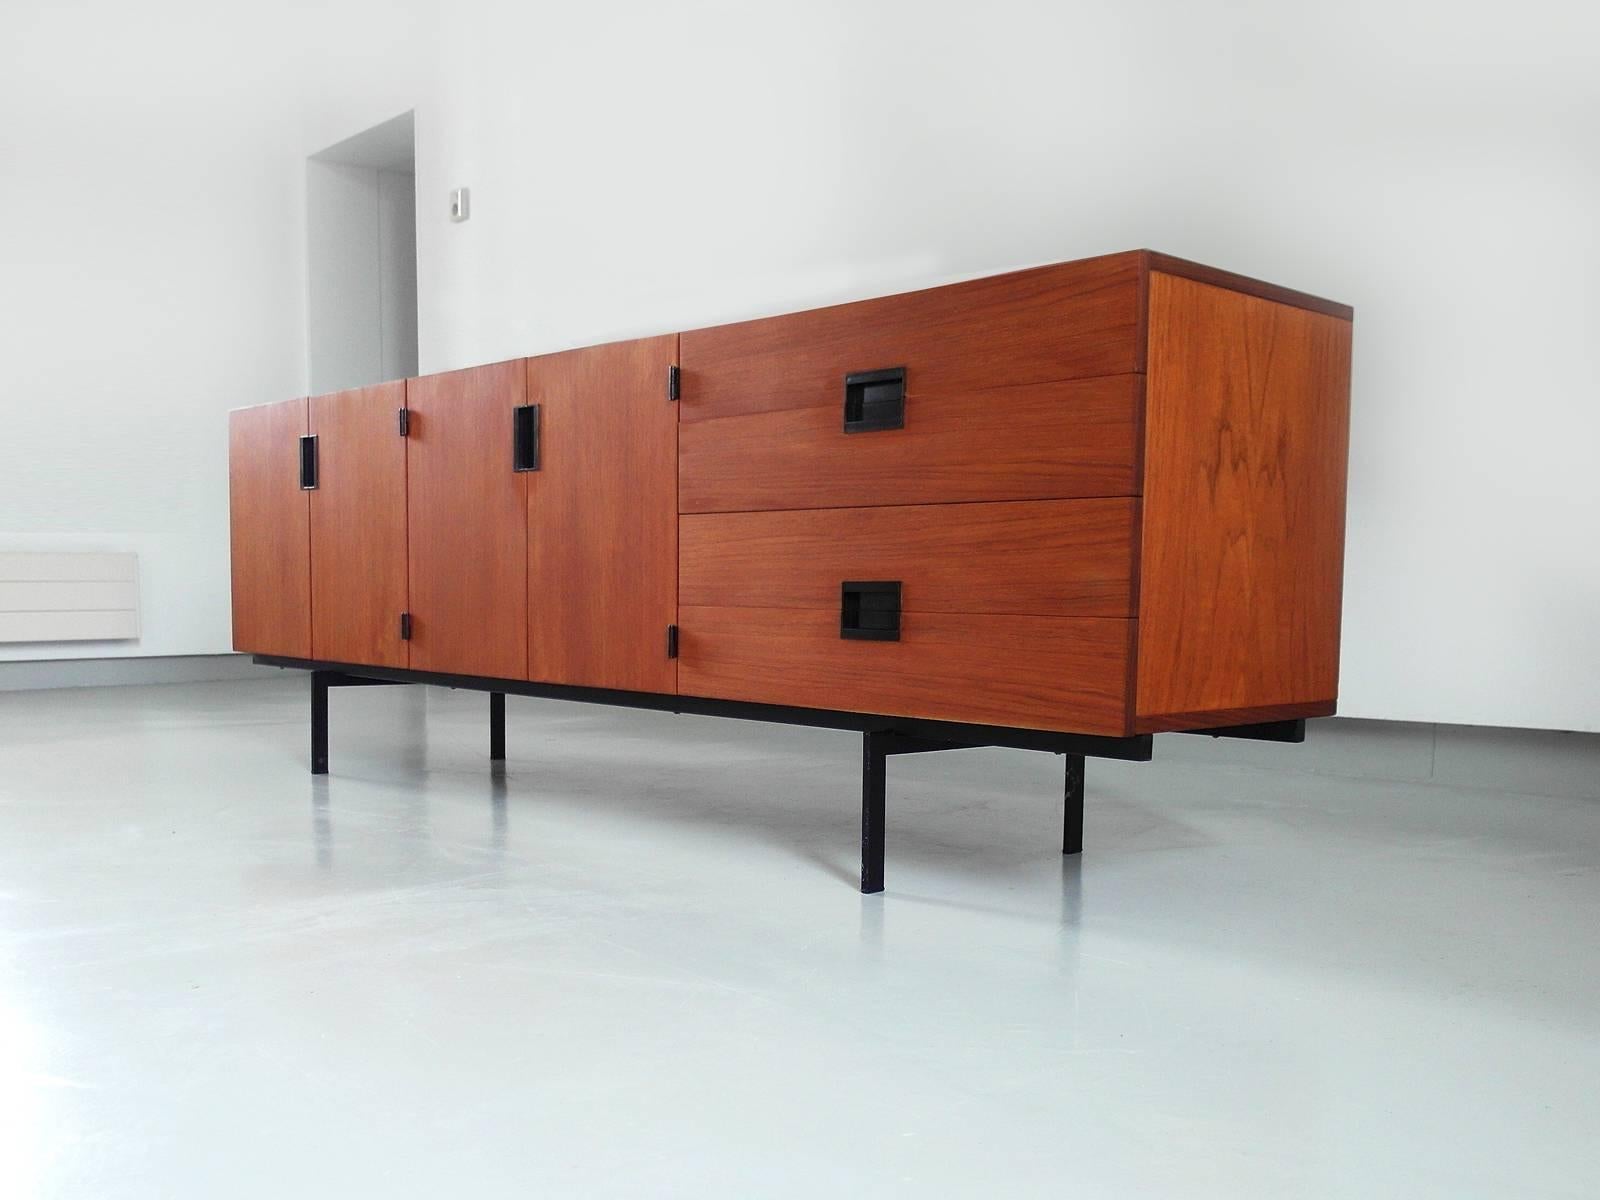 Minimalist sideboard designed by Cees Braakman for Pastoe, the Netherlands, 1958. This highly collectable DU03 sideboard is regarded as a true icon of Dutch Mid-Century Modern design. The sideboard has an outstanding clean geometrical design with a